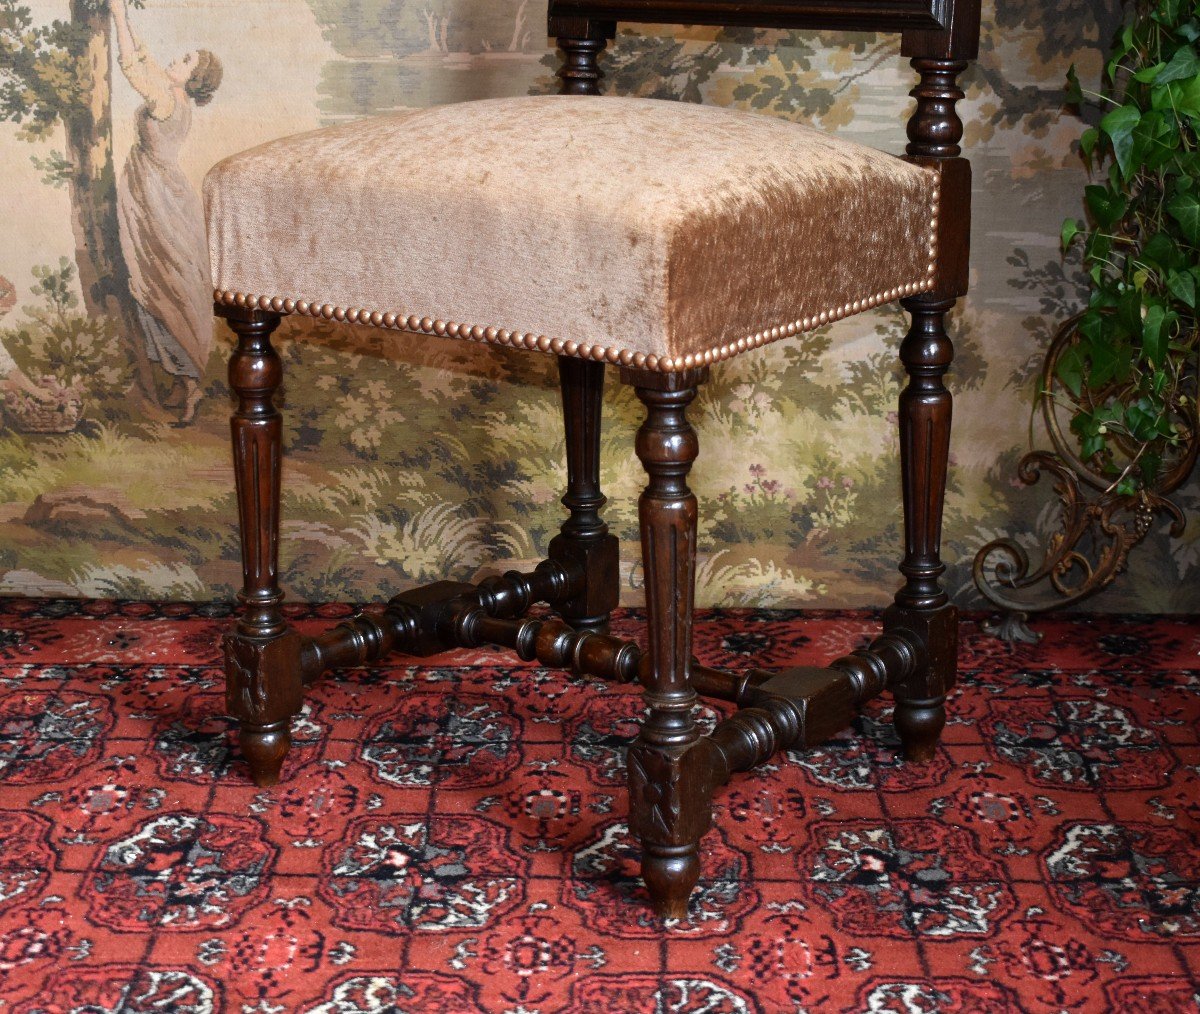 Renaissance Style Backrest Chair - Henri II From The End Of The 19th Century, Velvet Fabric Seat.-photo-2